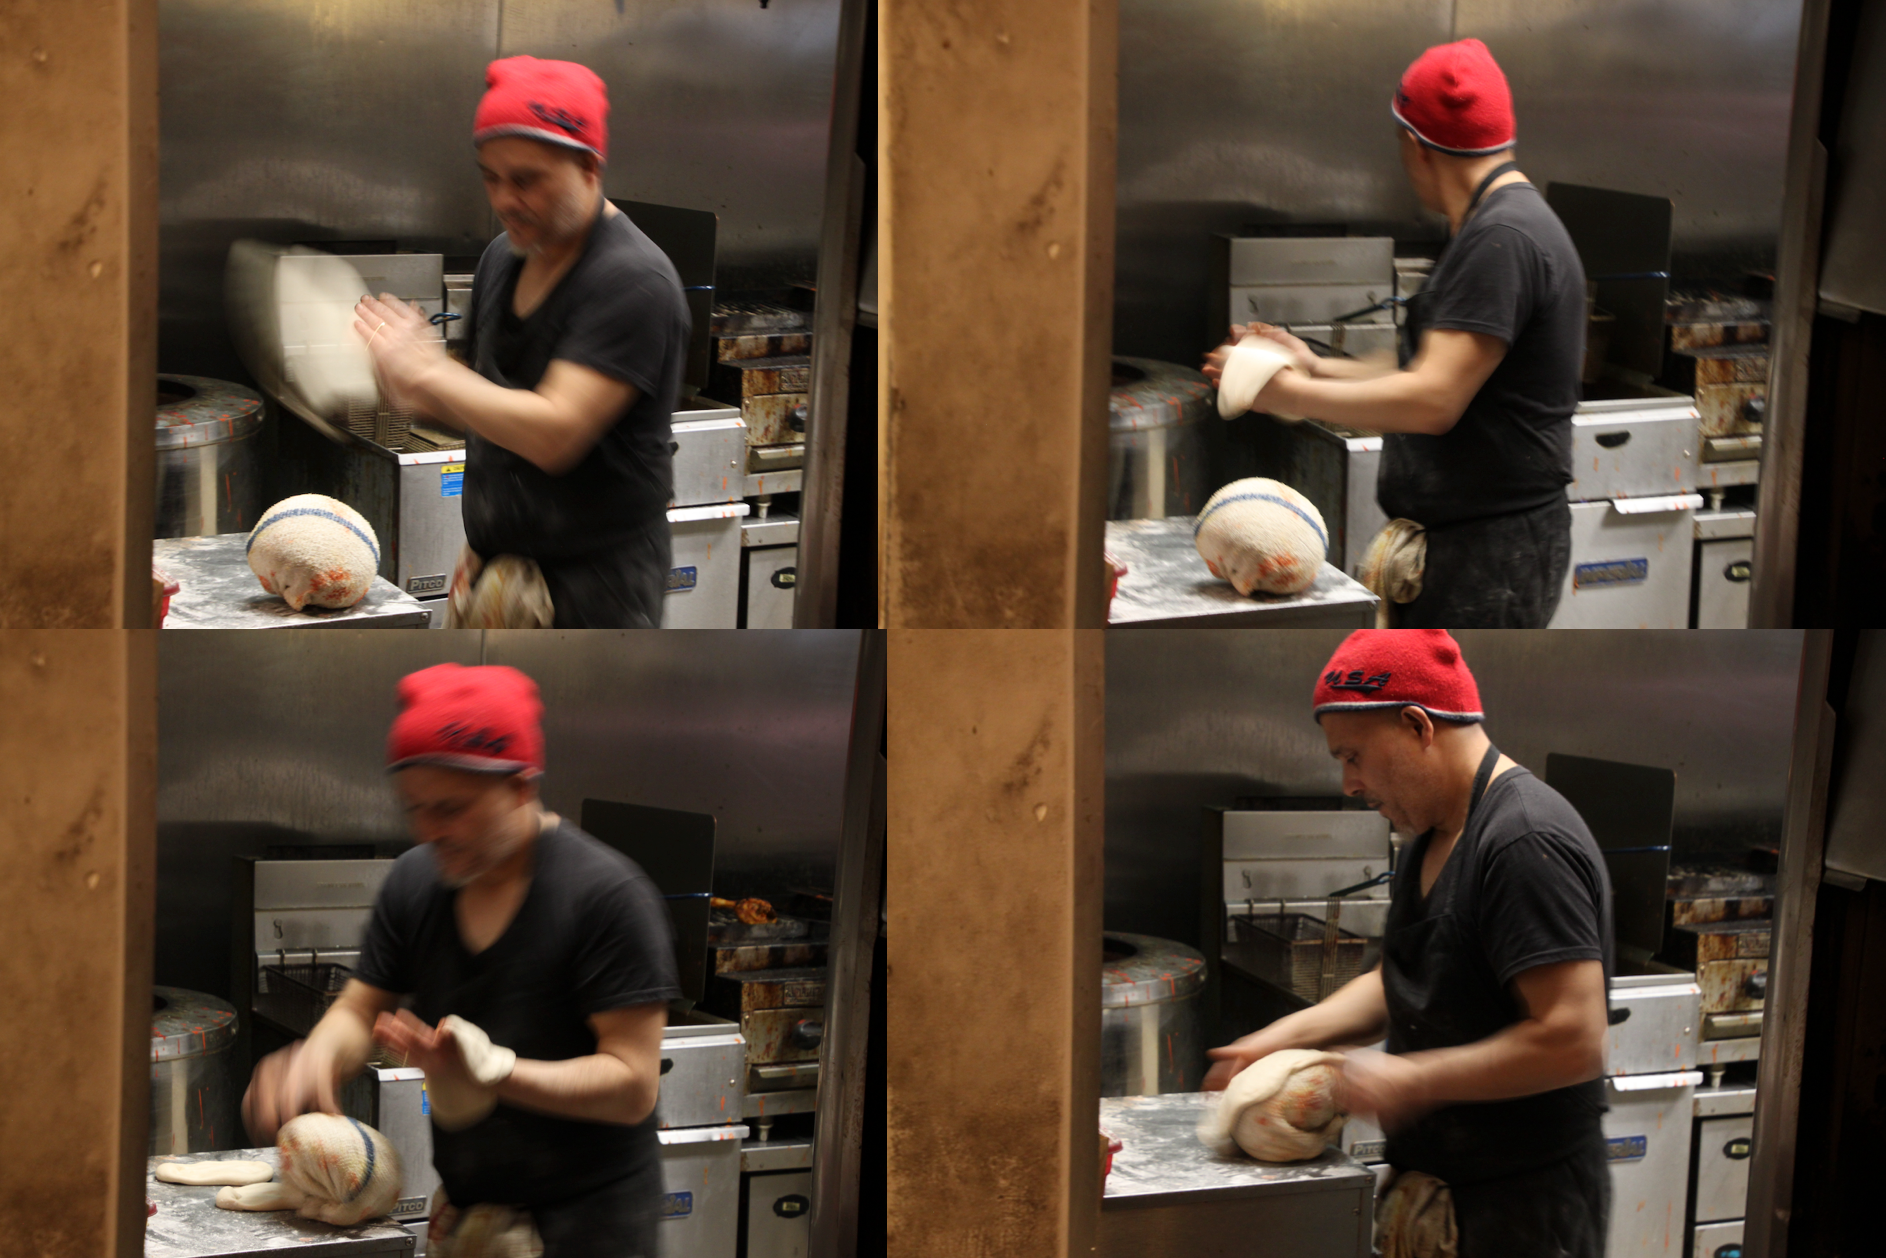 A man in a red hat moves quickly, stretching dough to make naan.